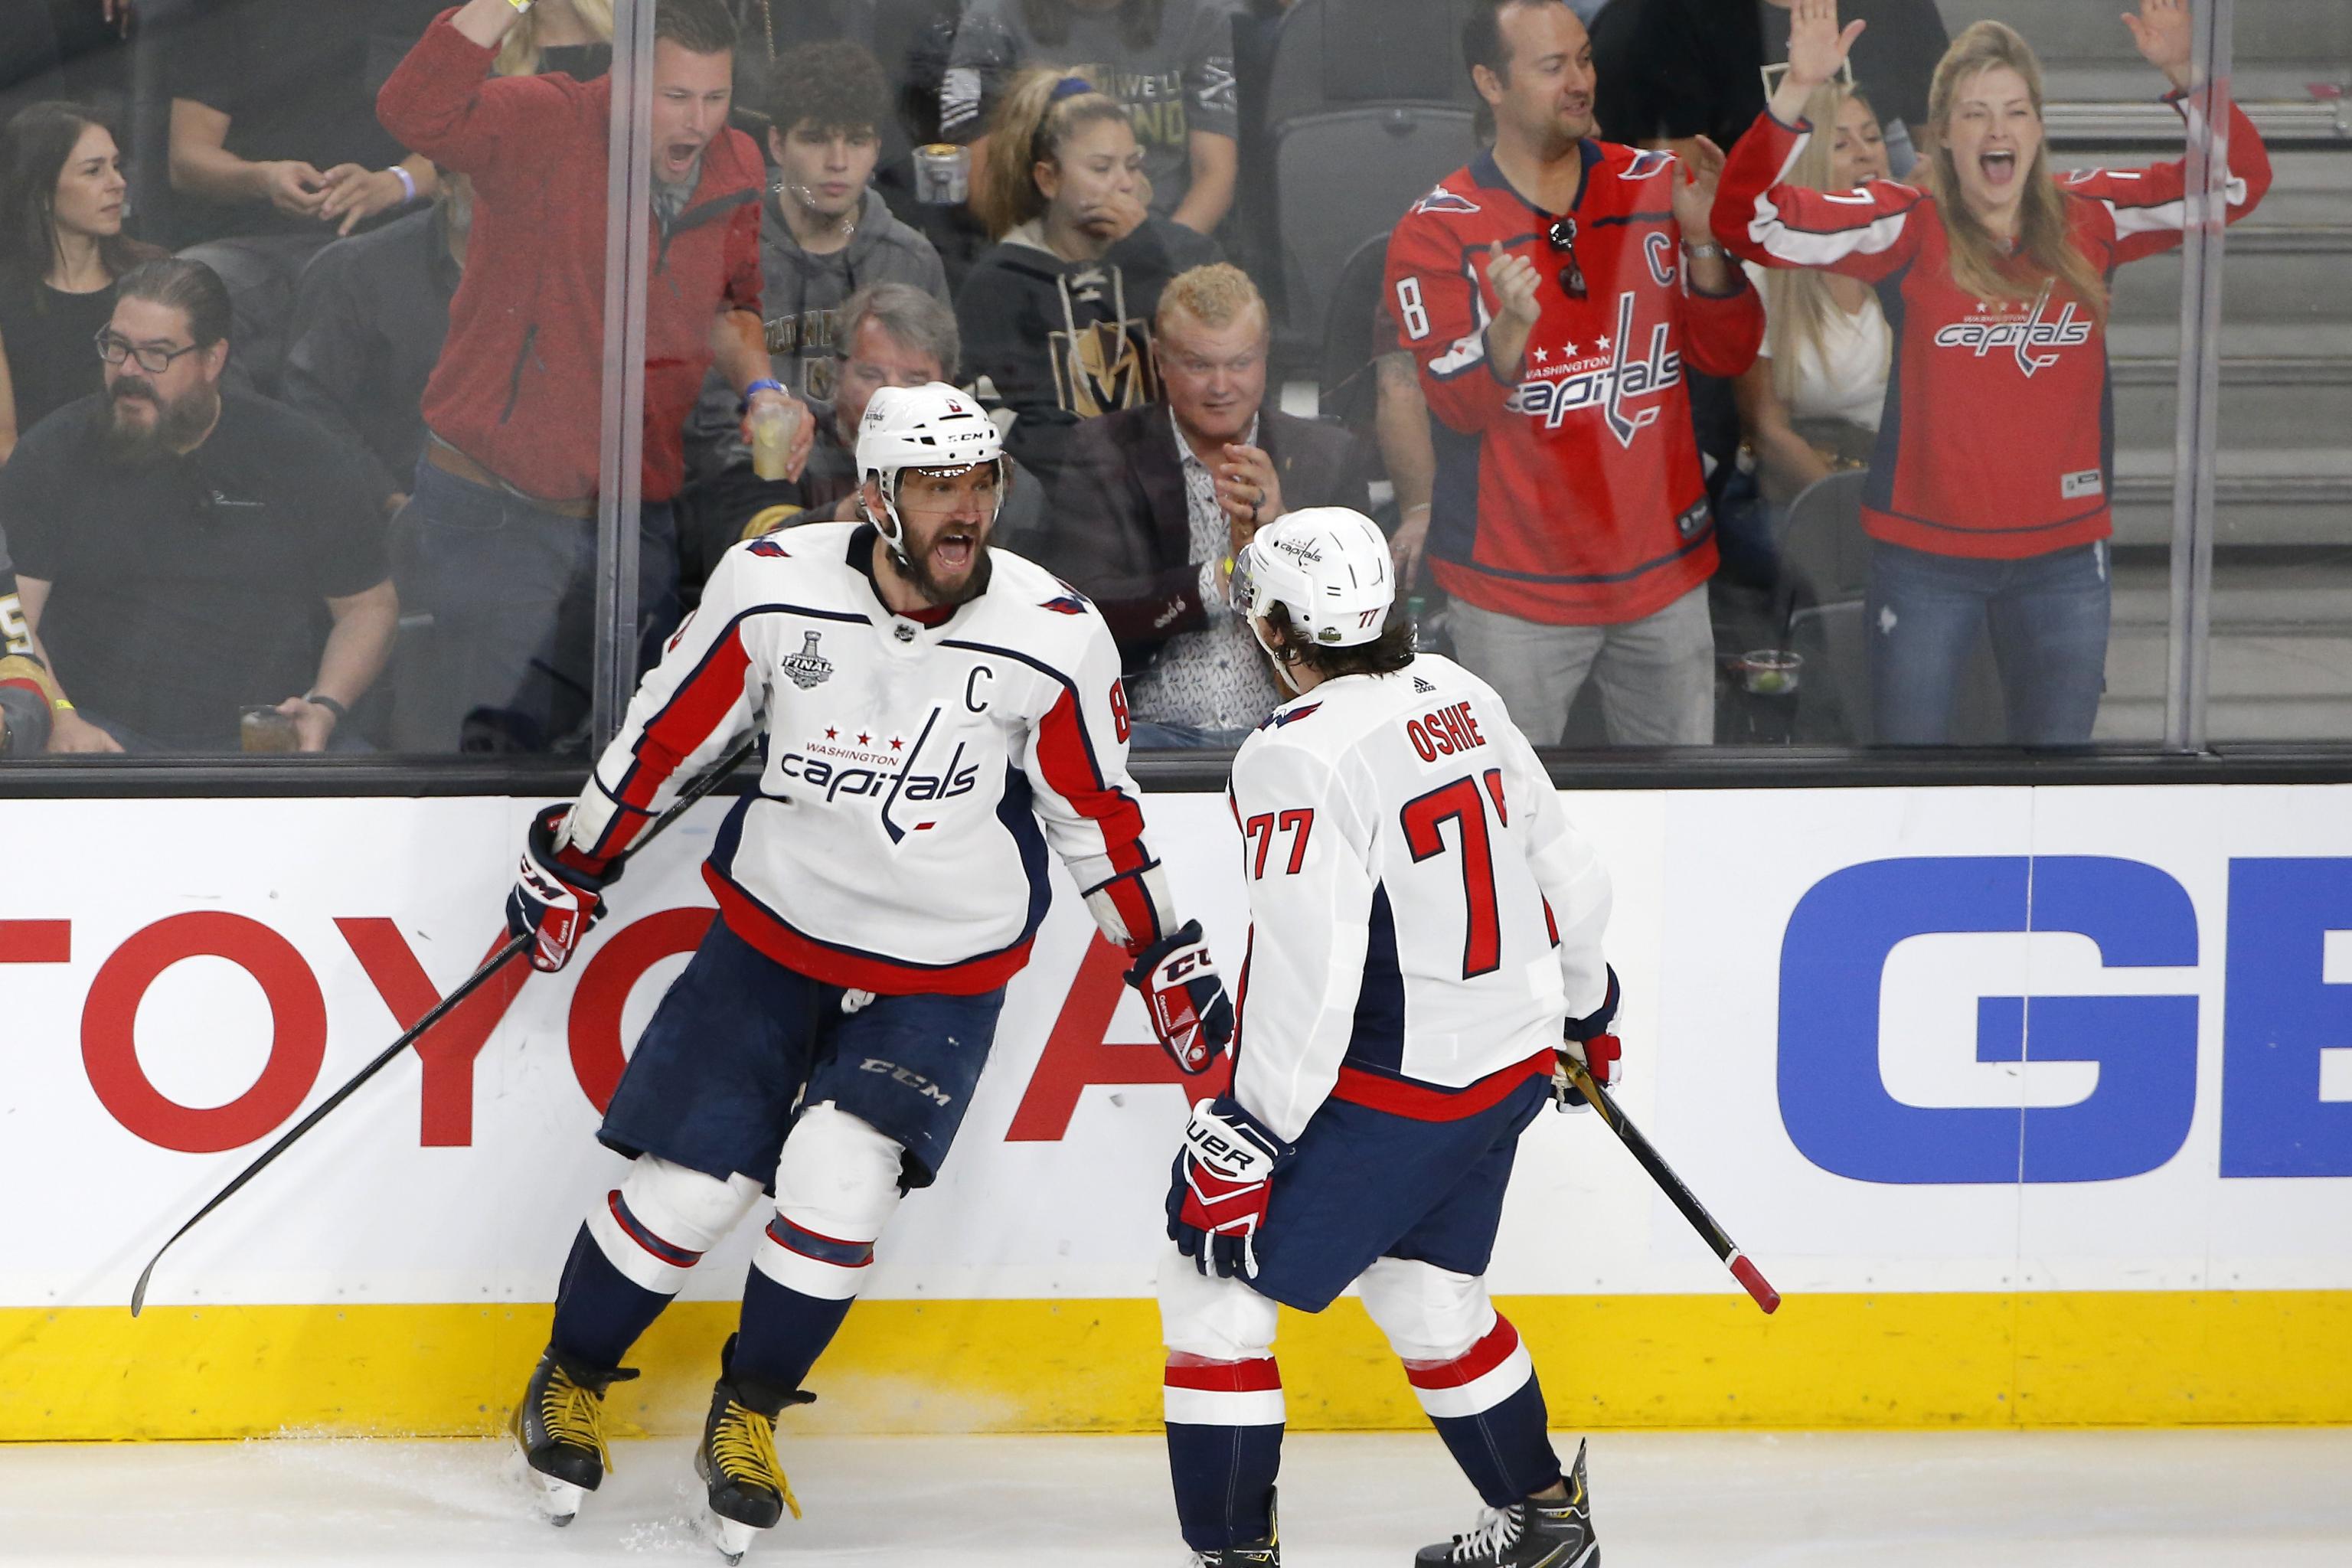 One year ago today: After 44 years, Capitals win first Stanley Cup